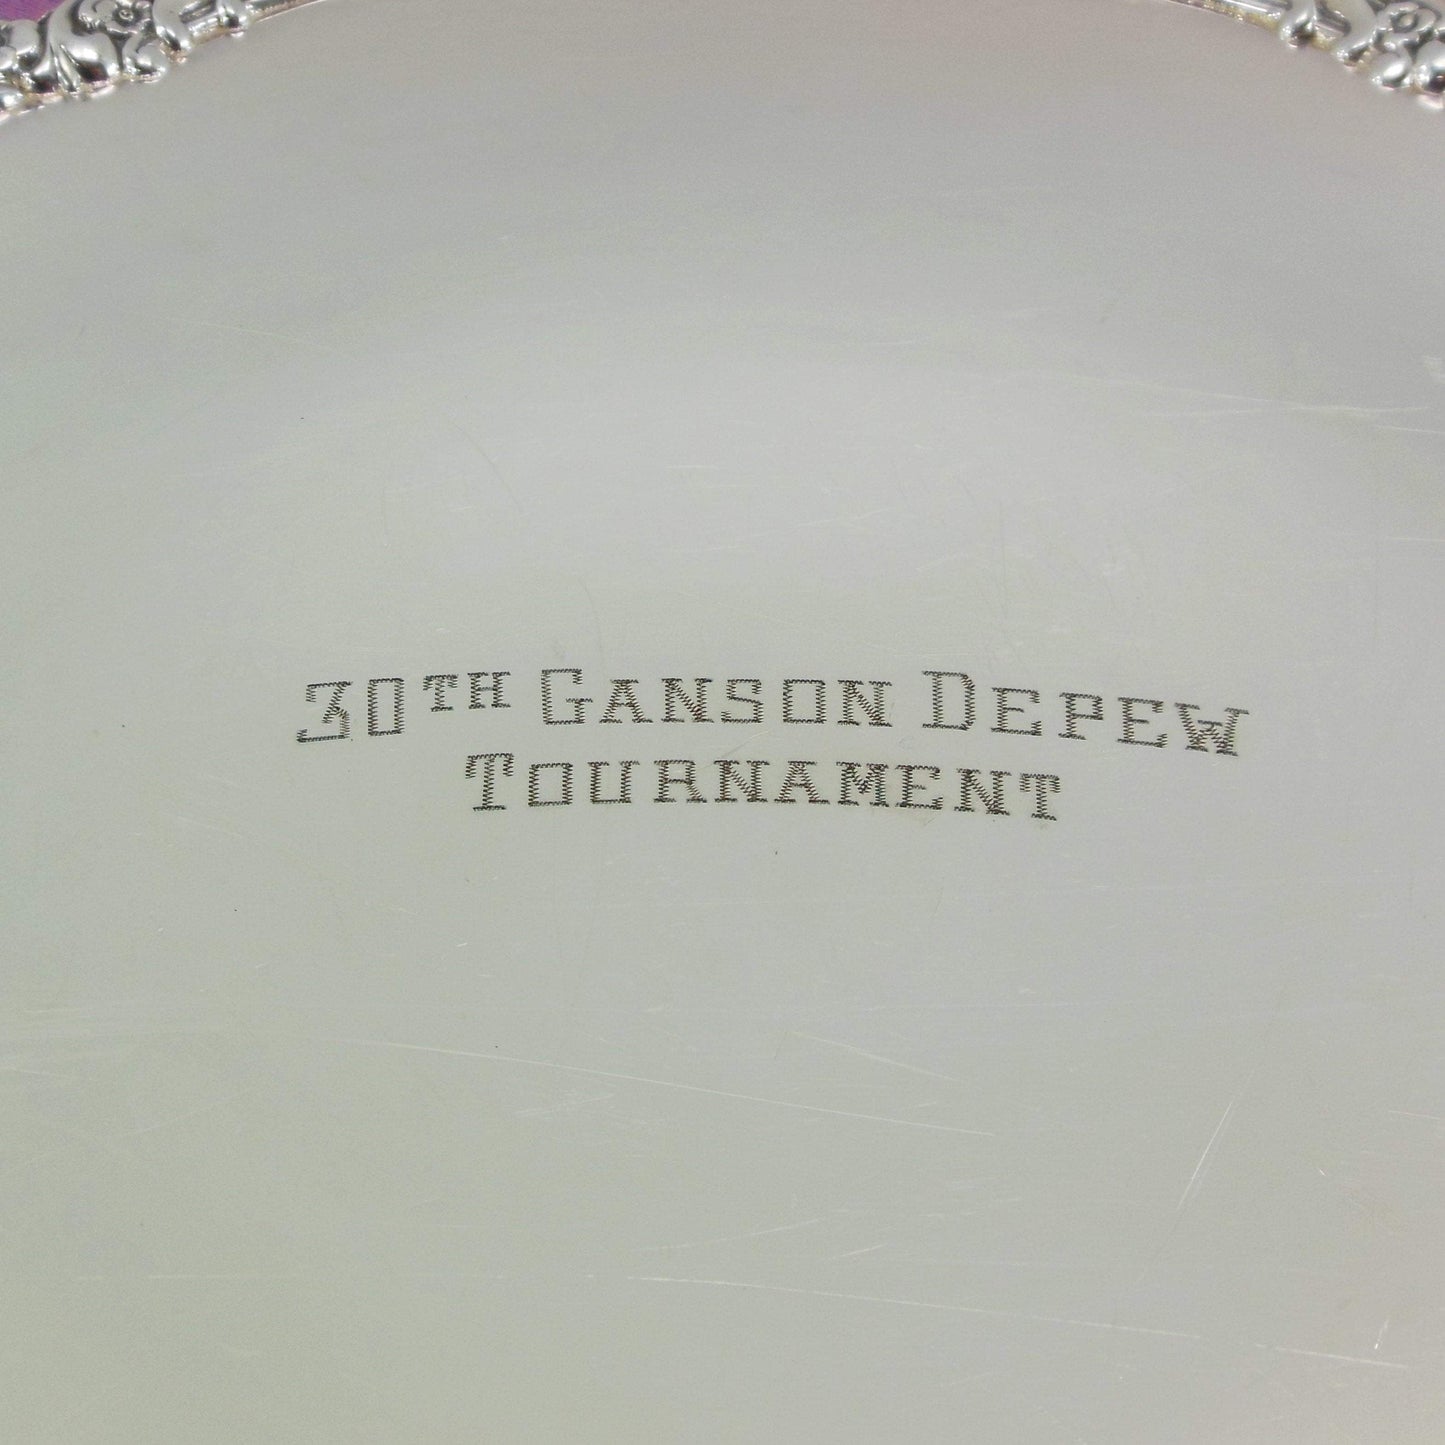 Rogers Bros. Heritage Silverplate Tray - 30th Ganson Depew Tournament Golf NY Vintage